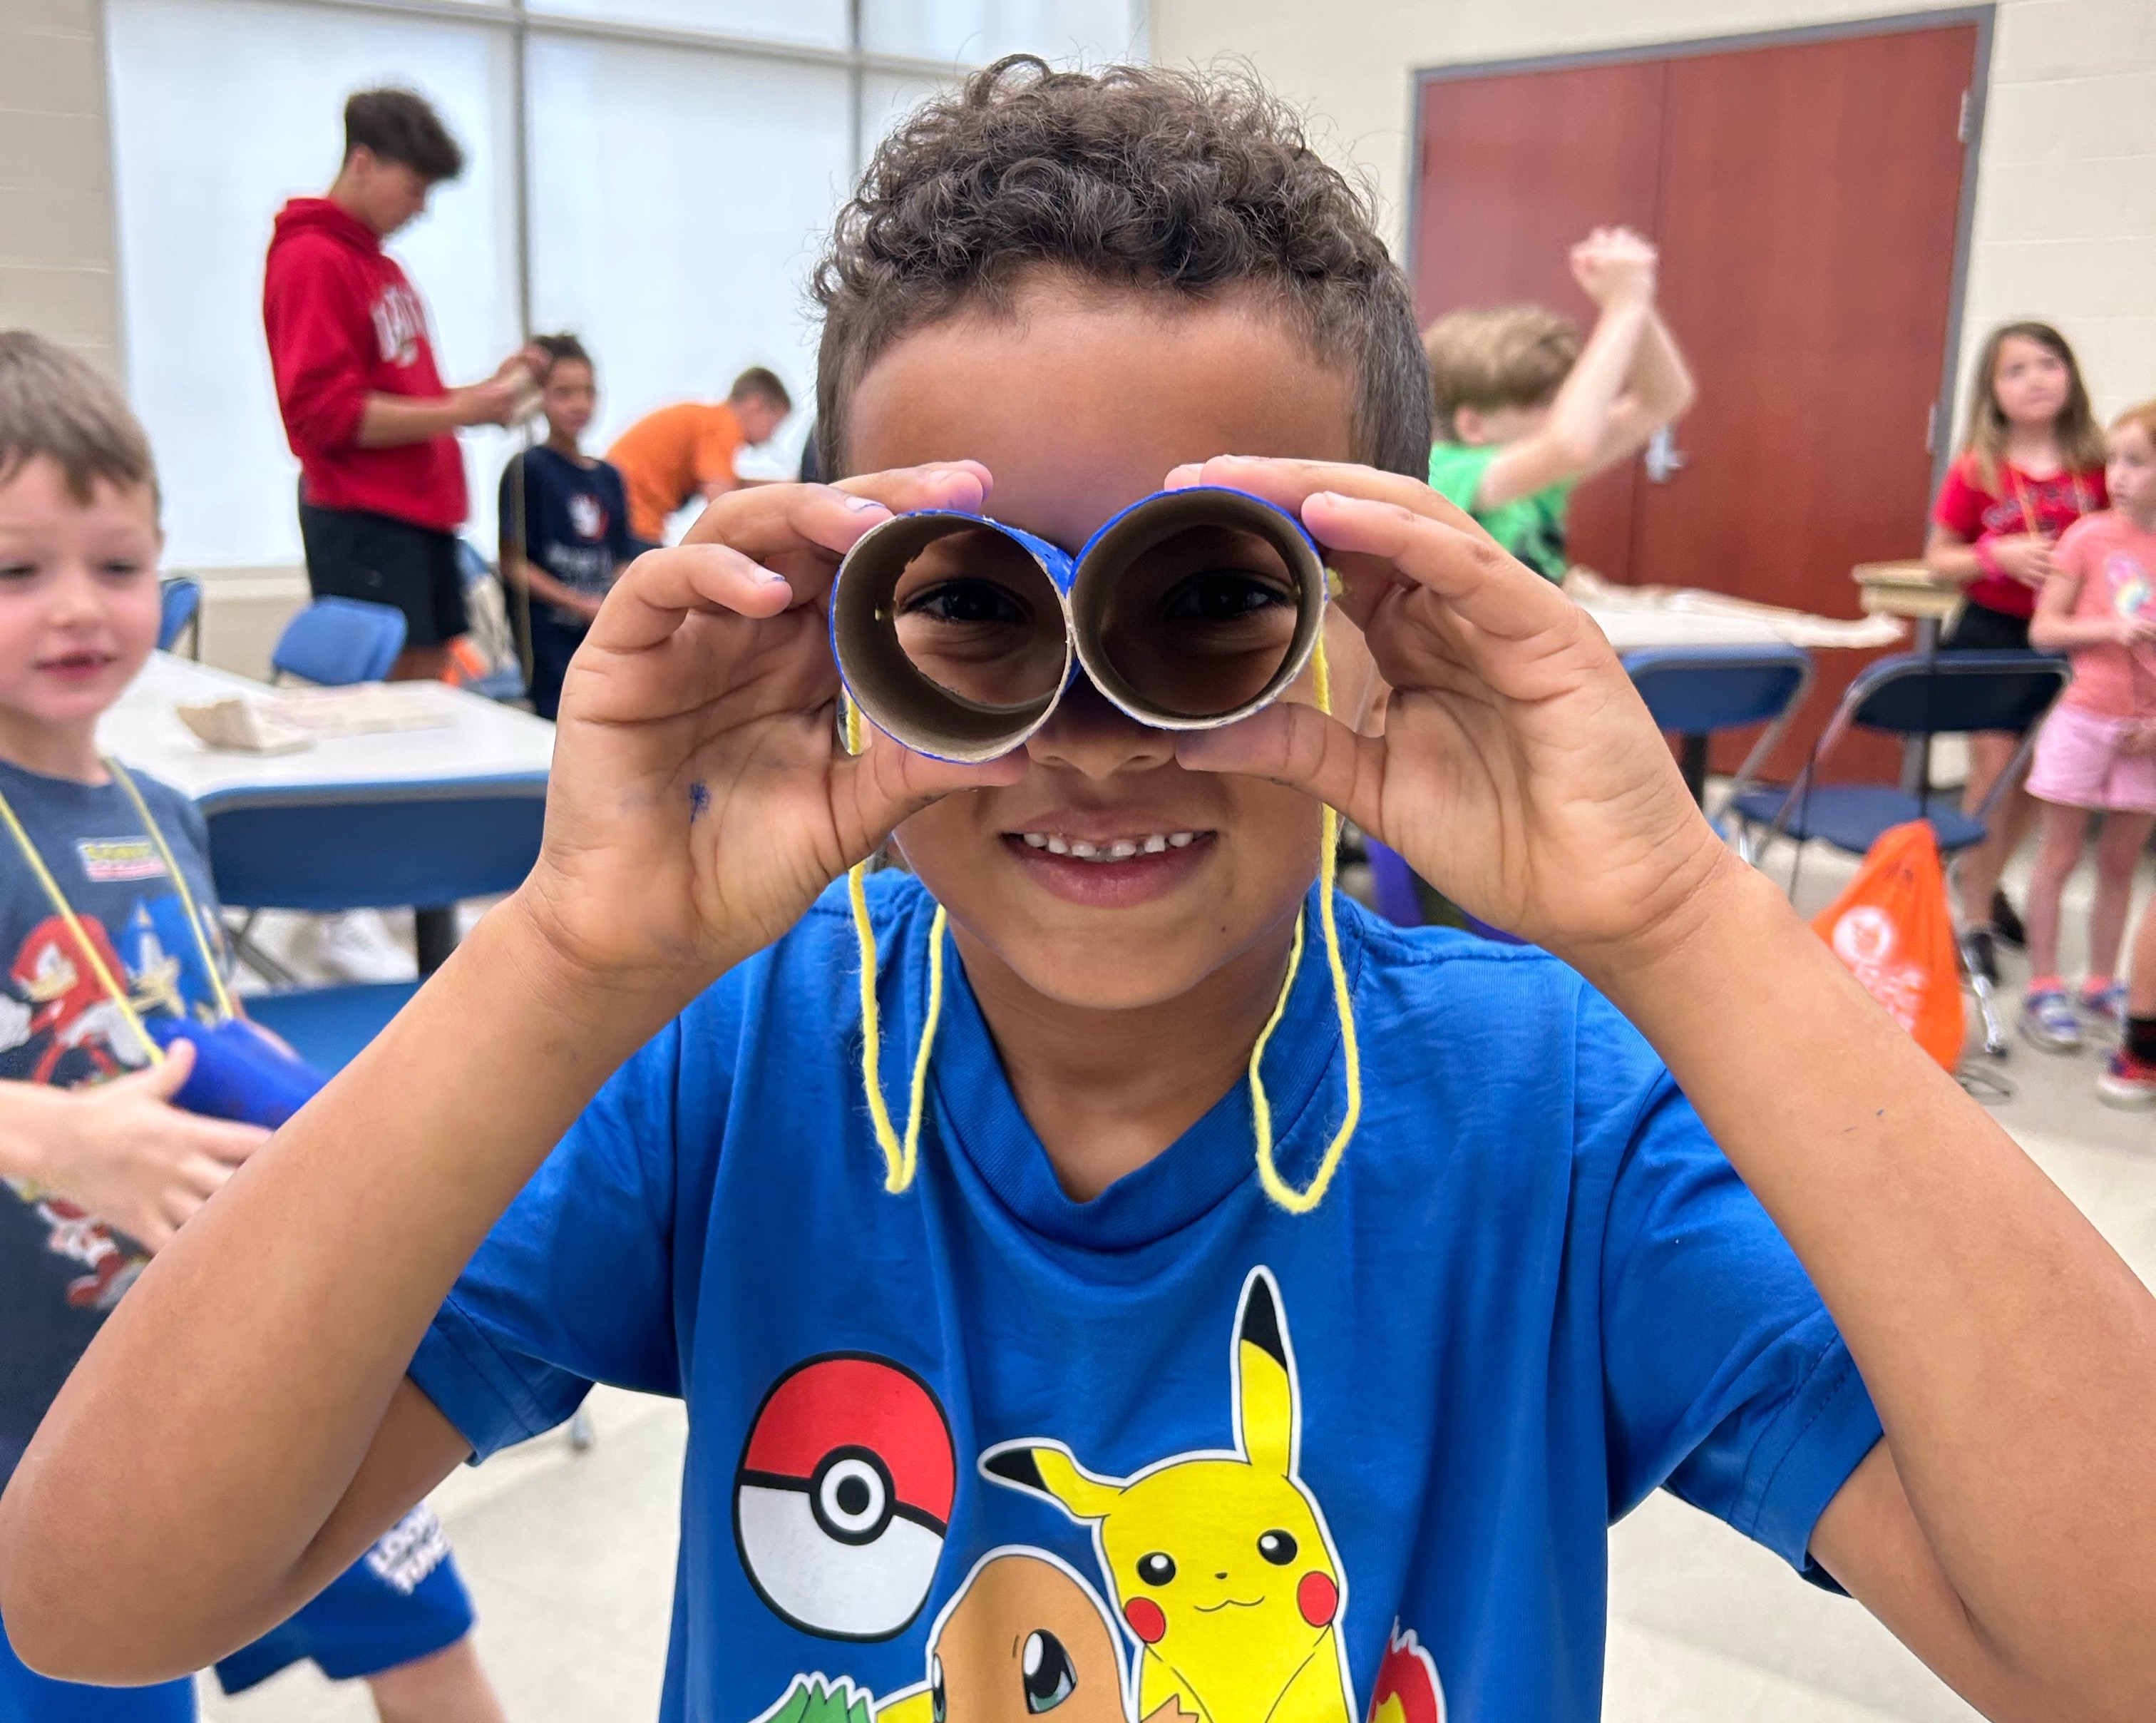 A RECkids camper looking through binoculars made by themselves in an arts and craft activity.